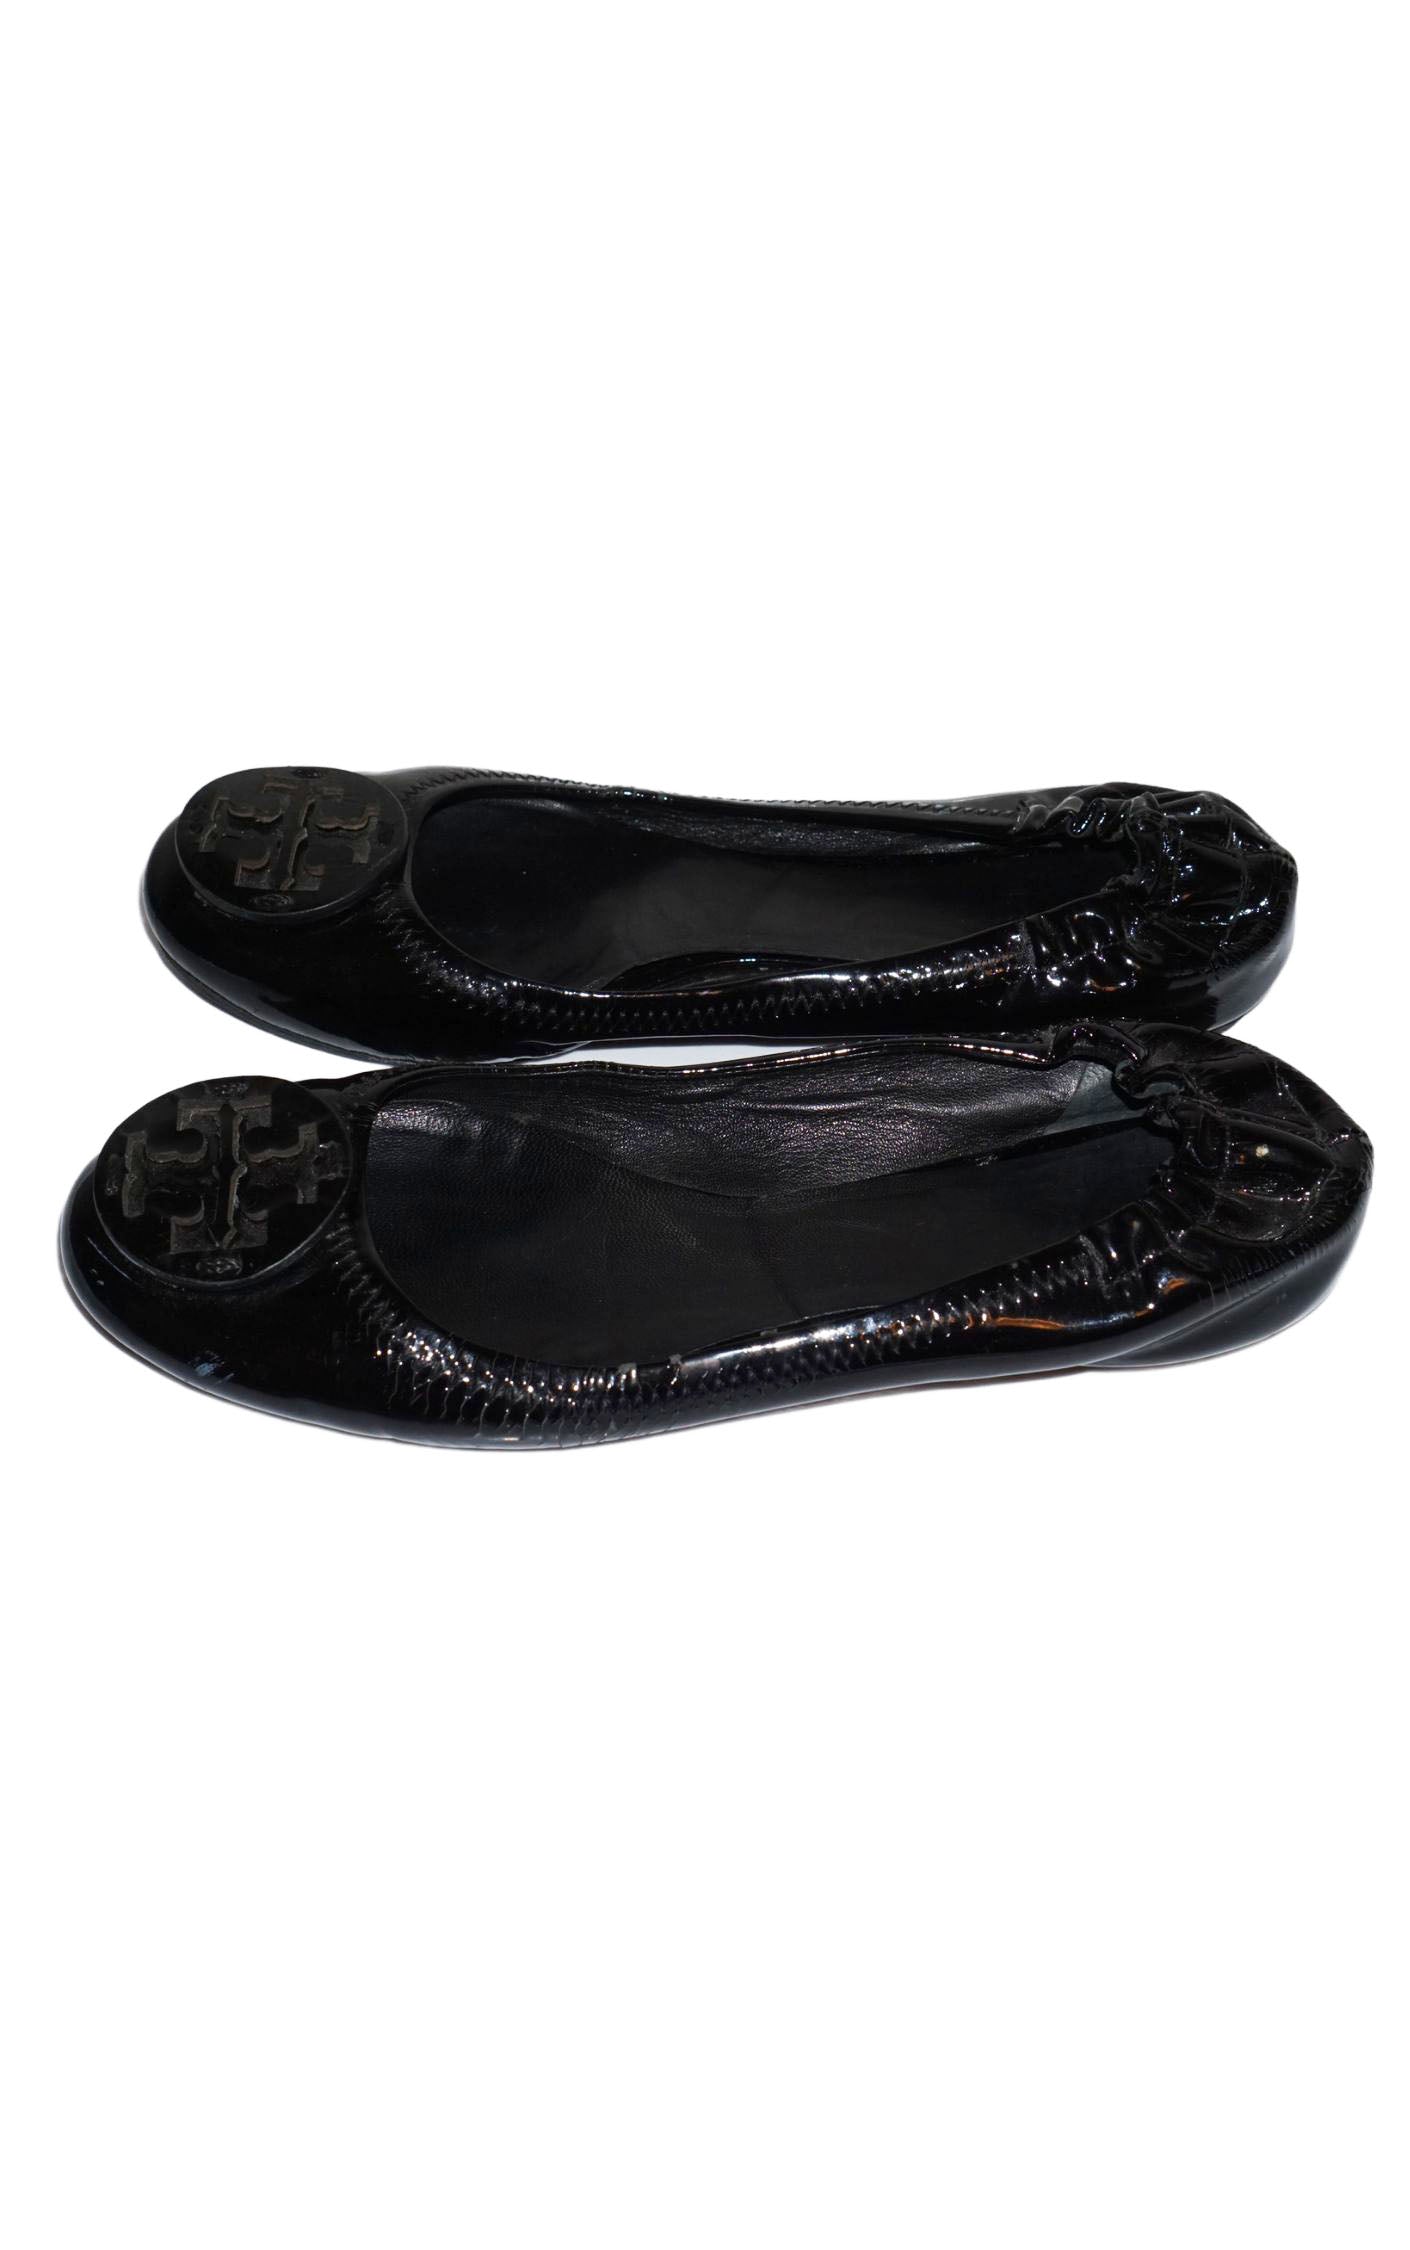 TORY BURCH Minnie Travel Black Patent Leather Ballet Flat Shoes resellum